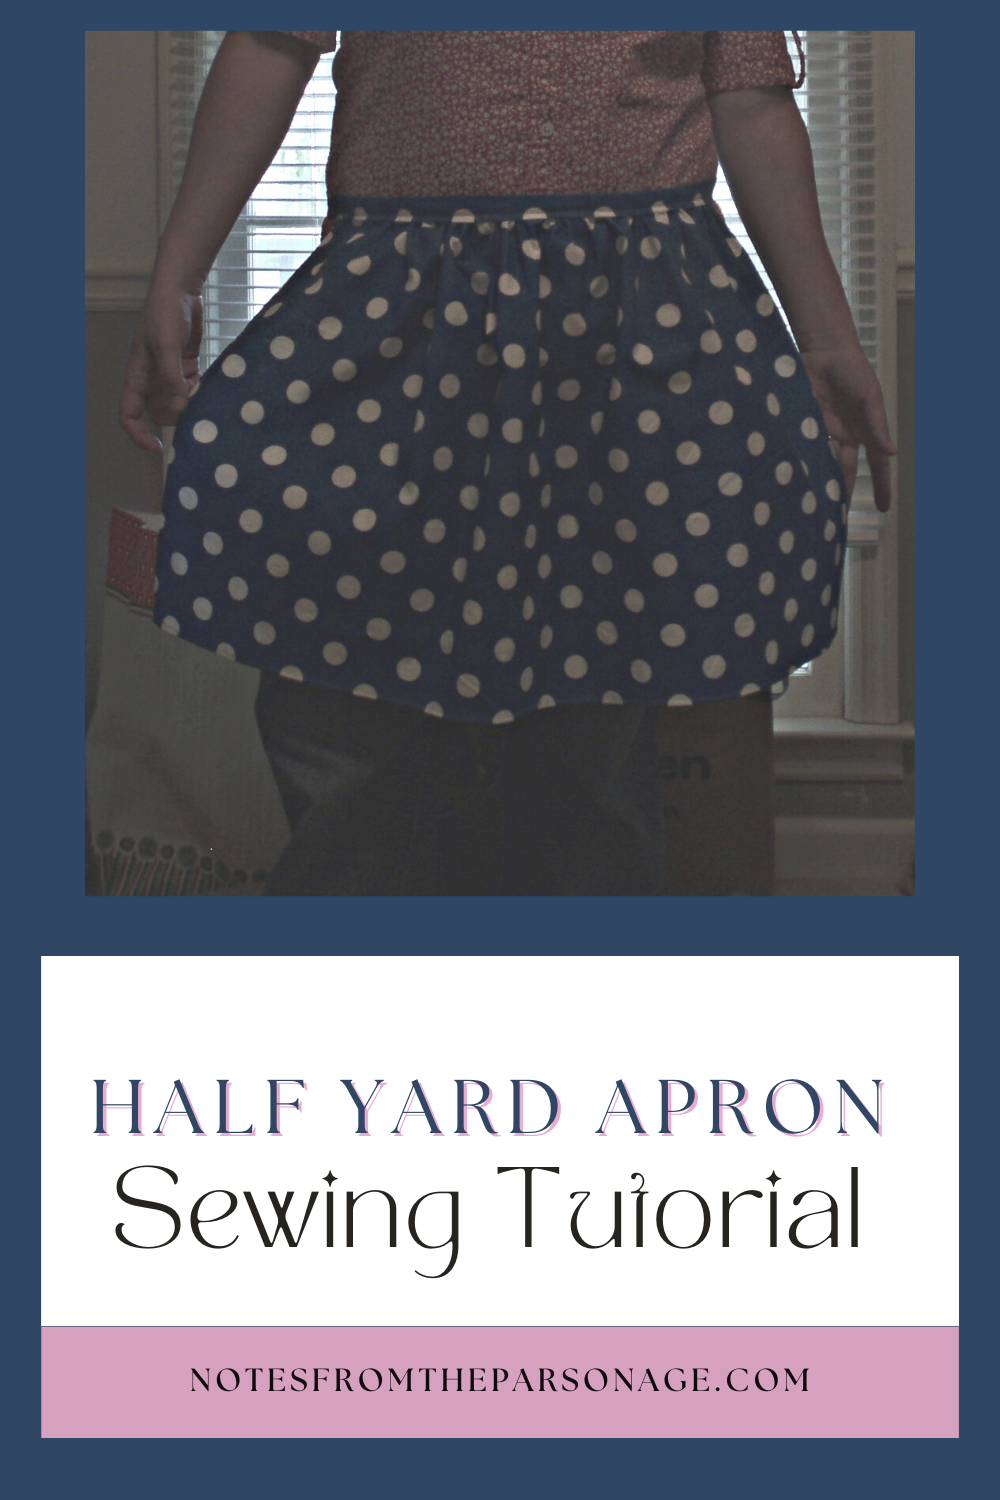 Top is picture of half yard apron half apron on woman with text on bottom saying "Half yard Apron Sewing Tutorial"